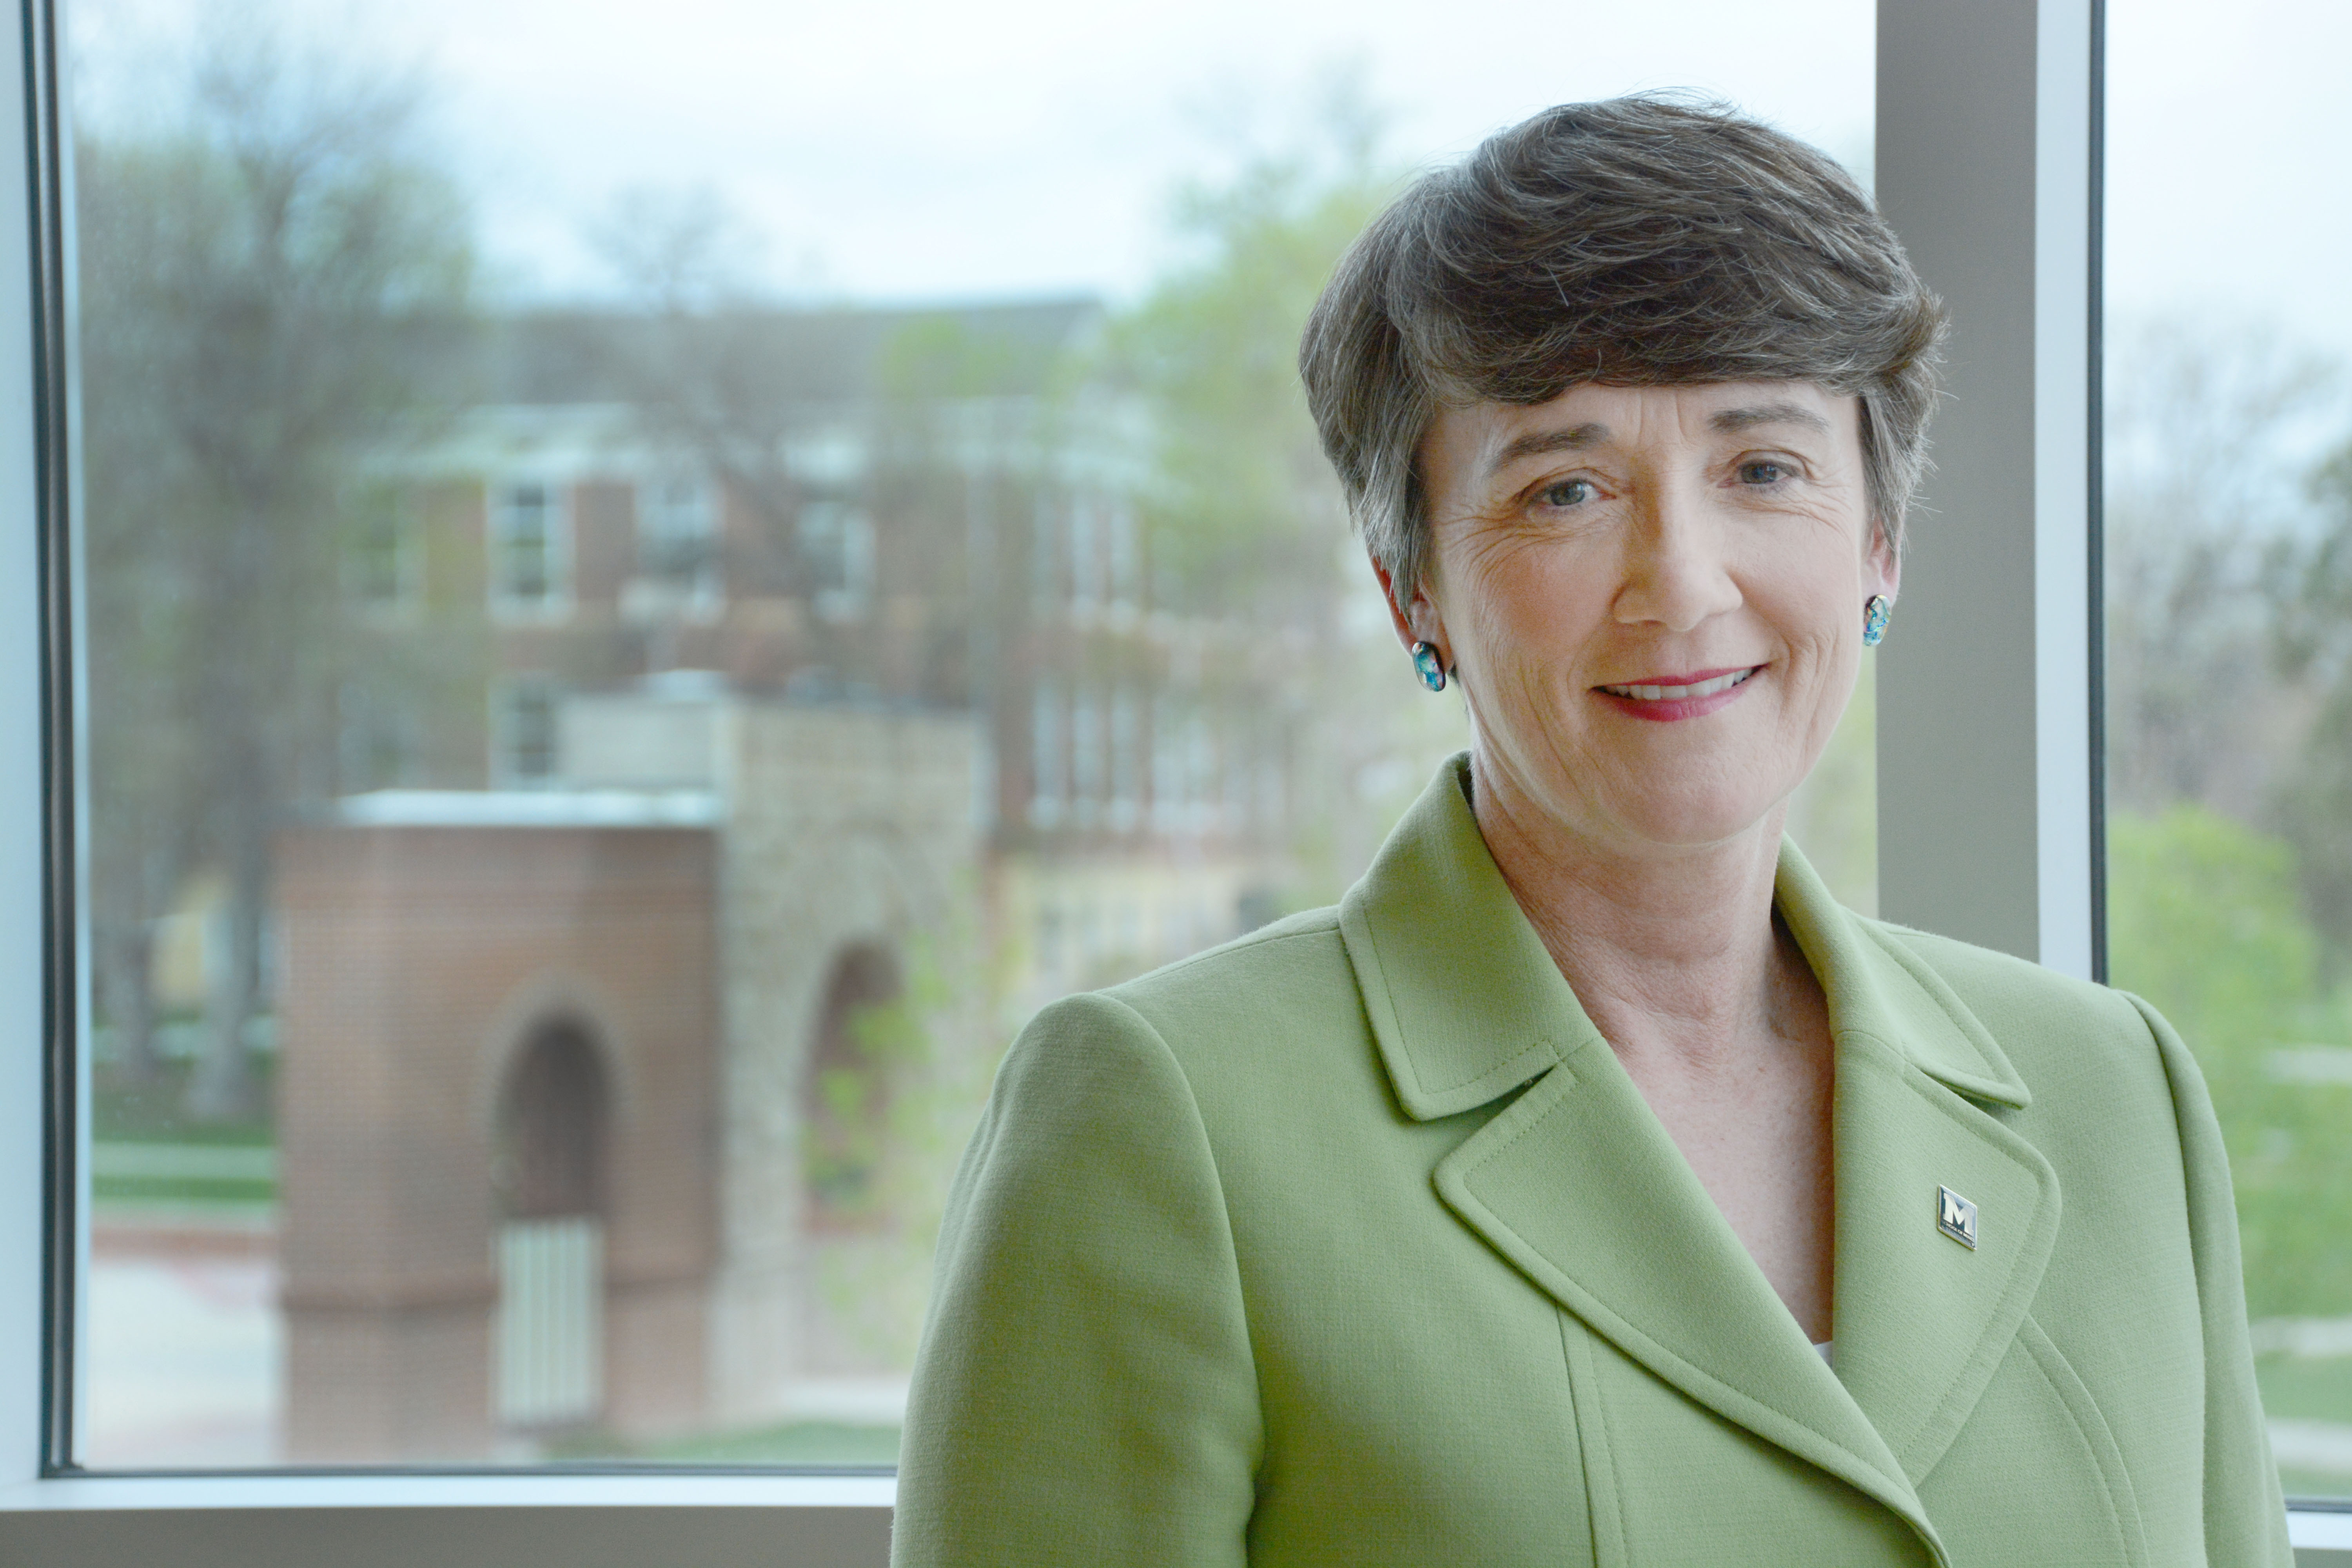 Heather Wilson is the 18th president of the South Dakota School of Mines & Technology in Rapid City, S.D.